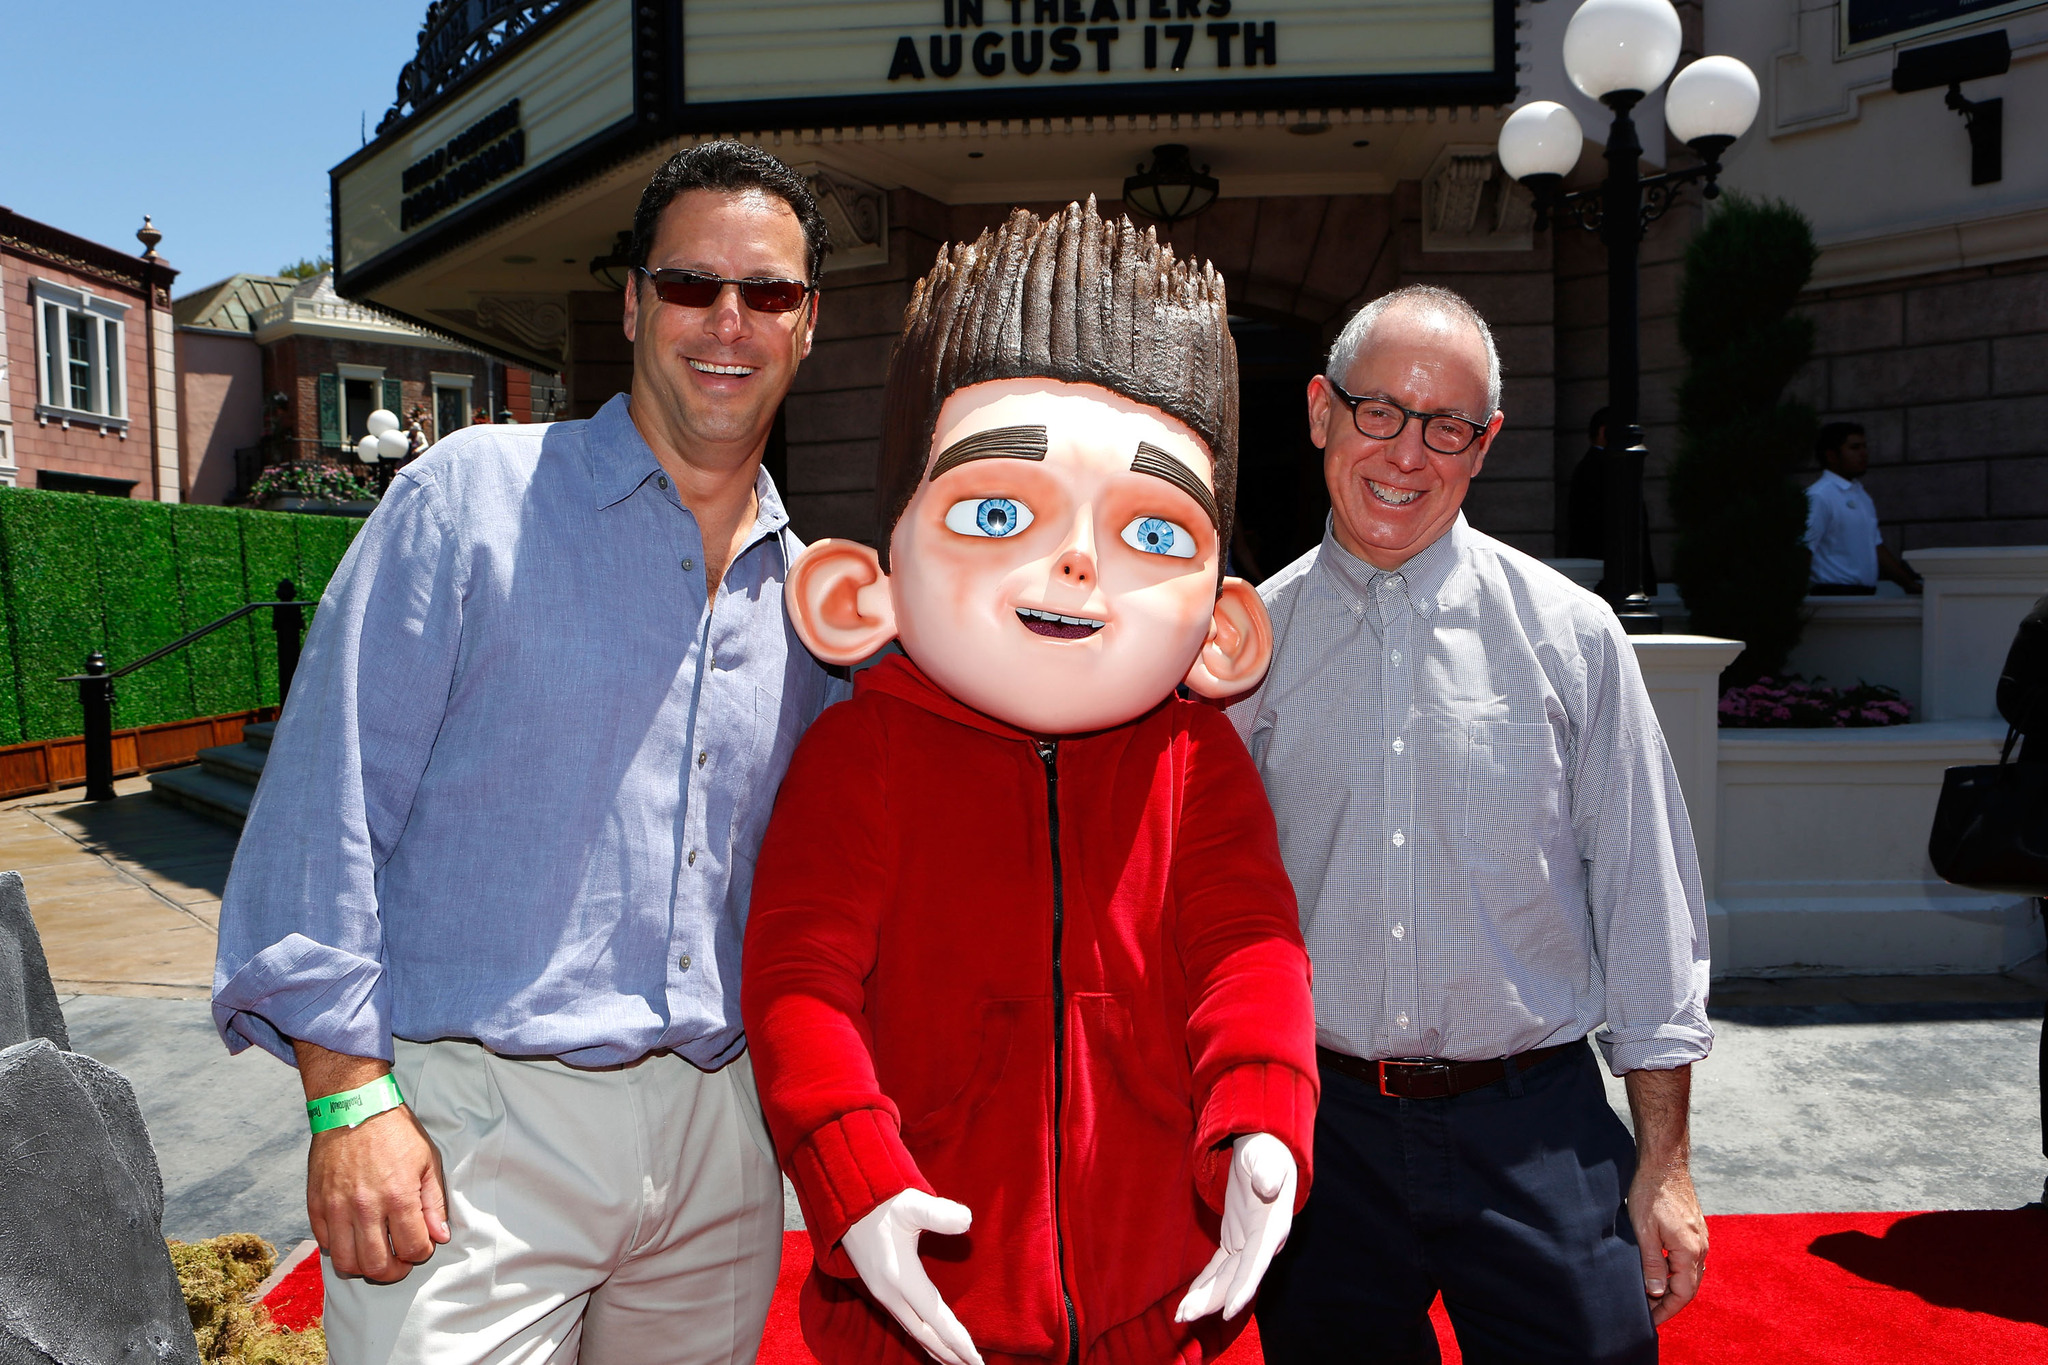 James Schamus and Andrew Karpen at event of Paranormanas (2012)